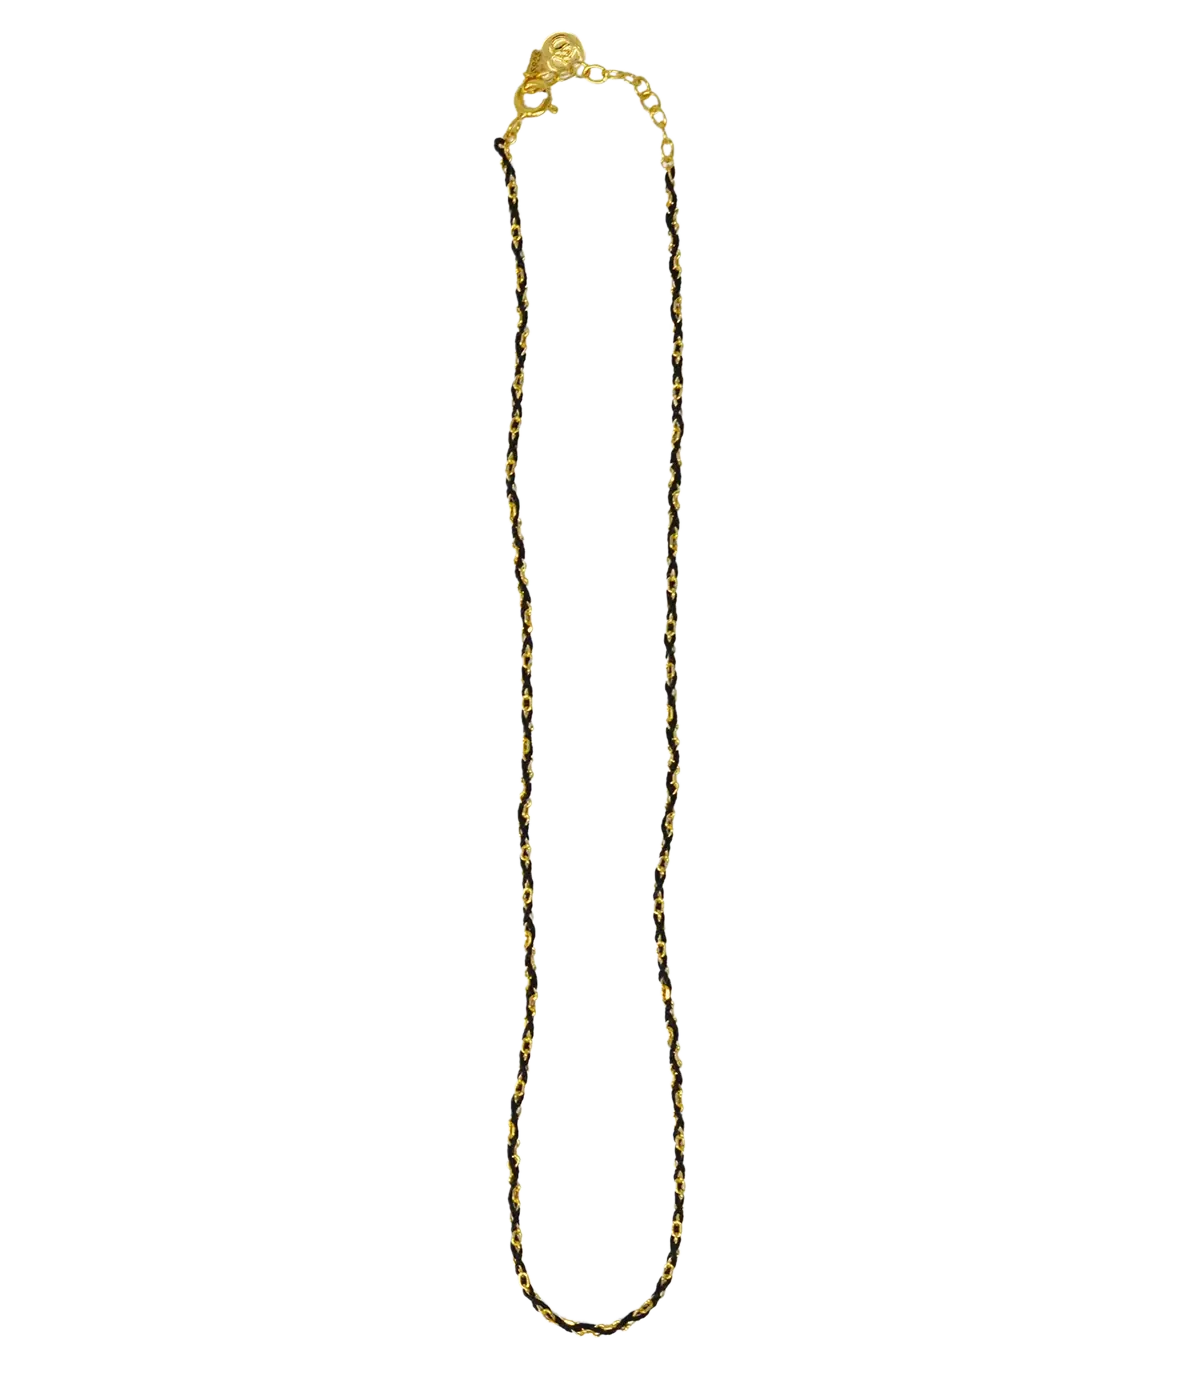 Rook Necklace in 14K Yellow Gold & Black